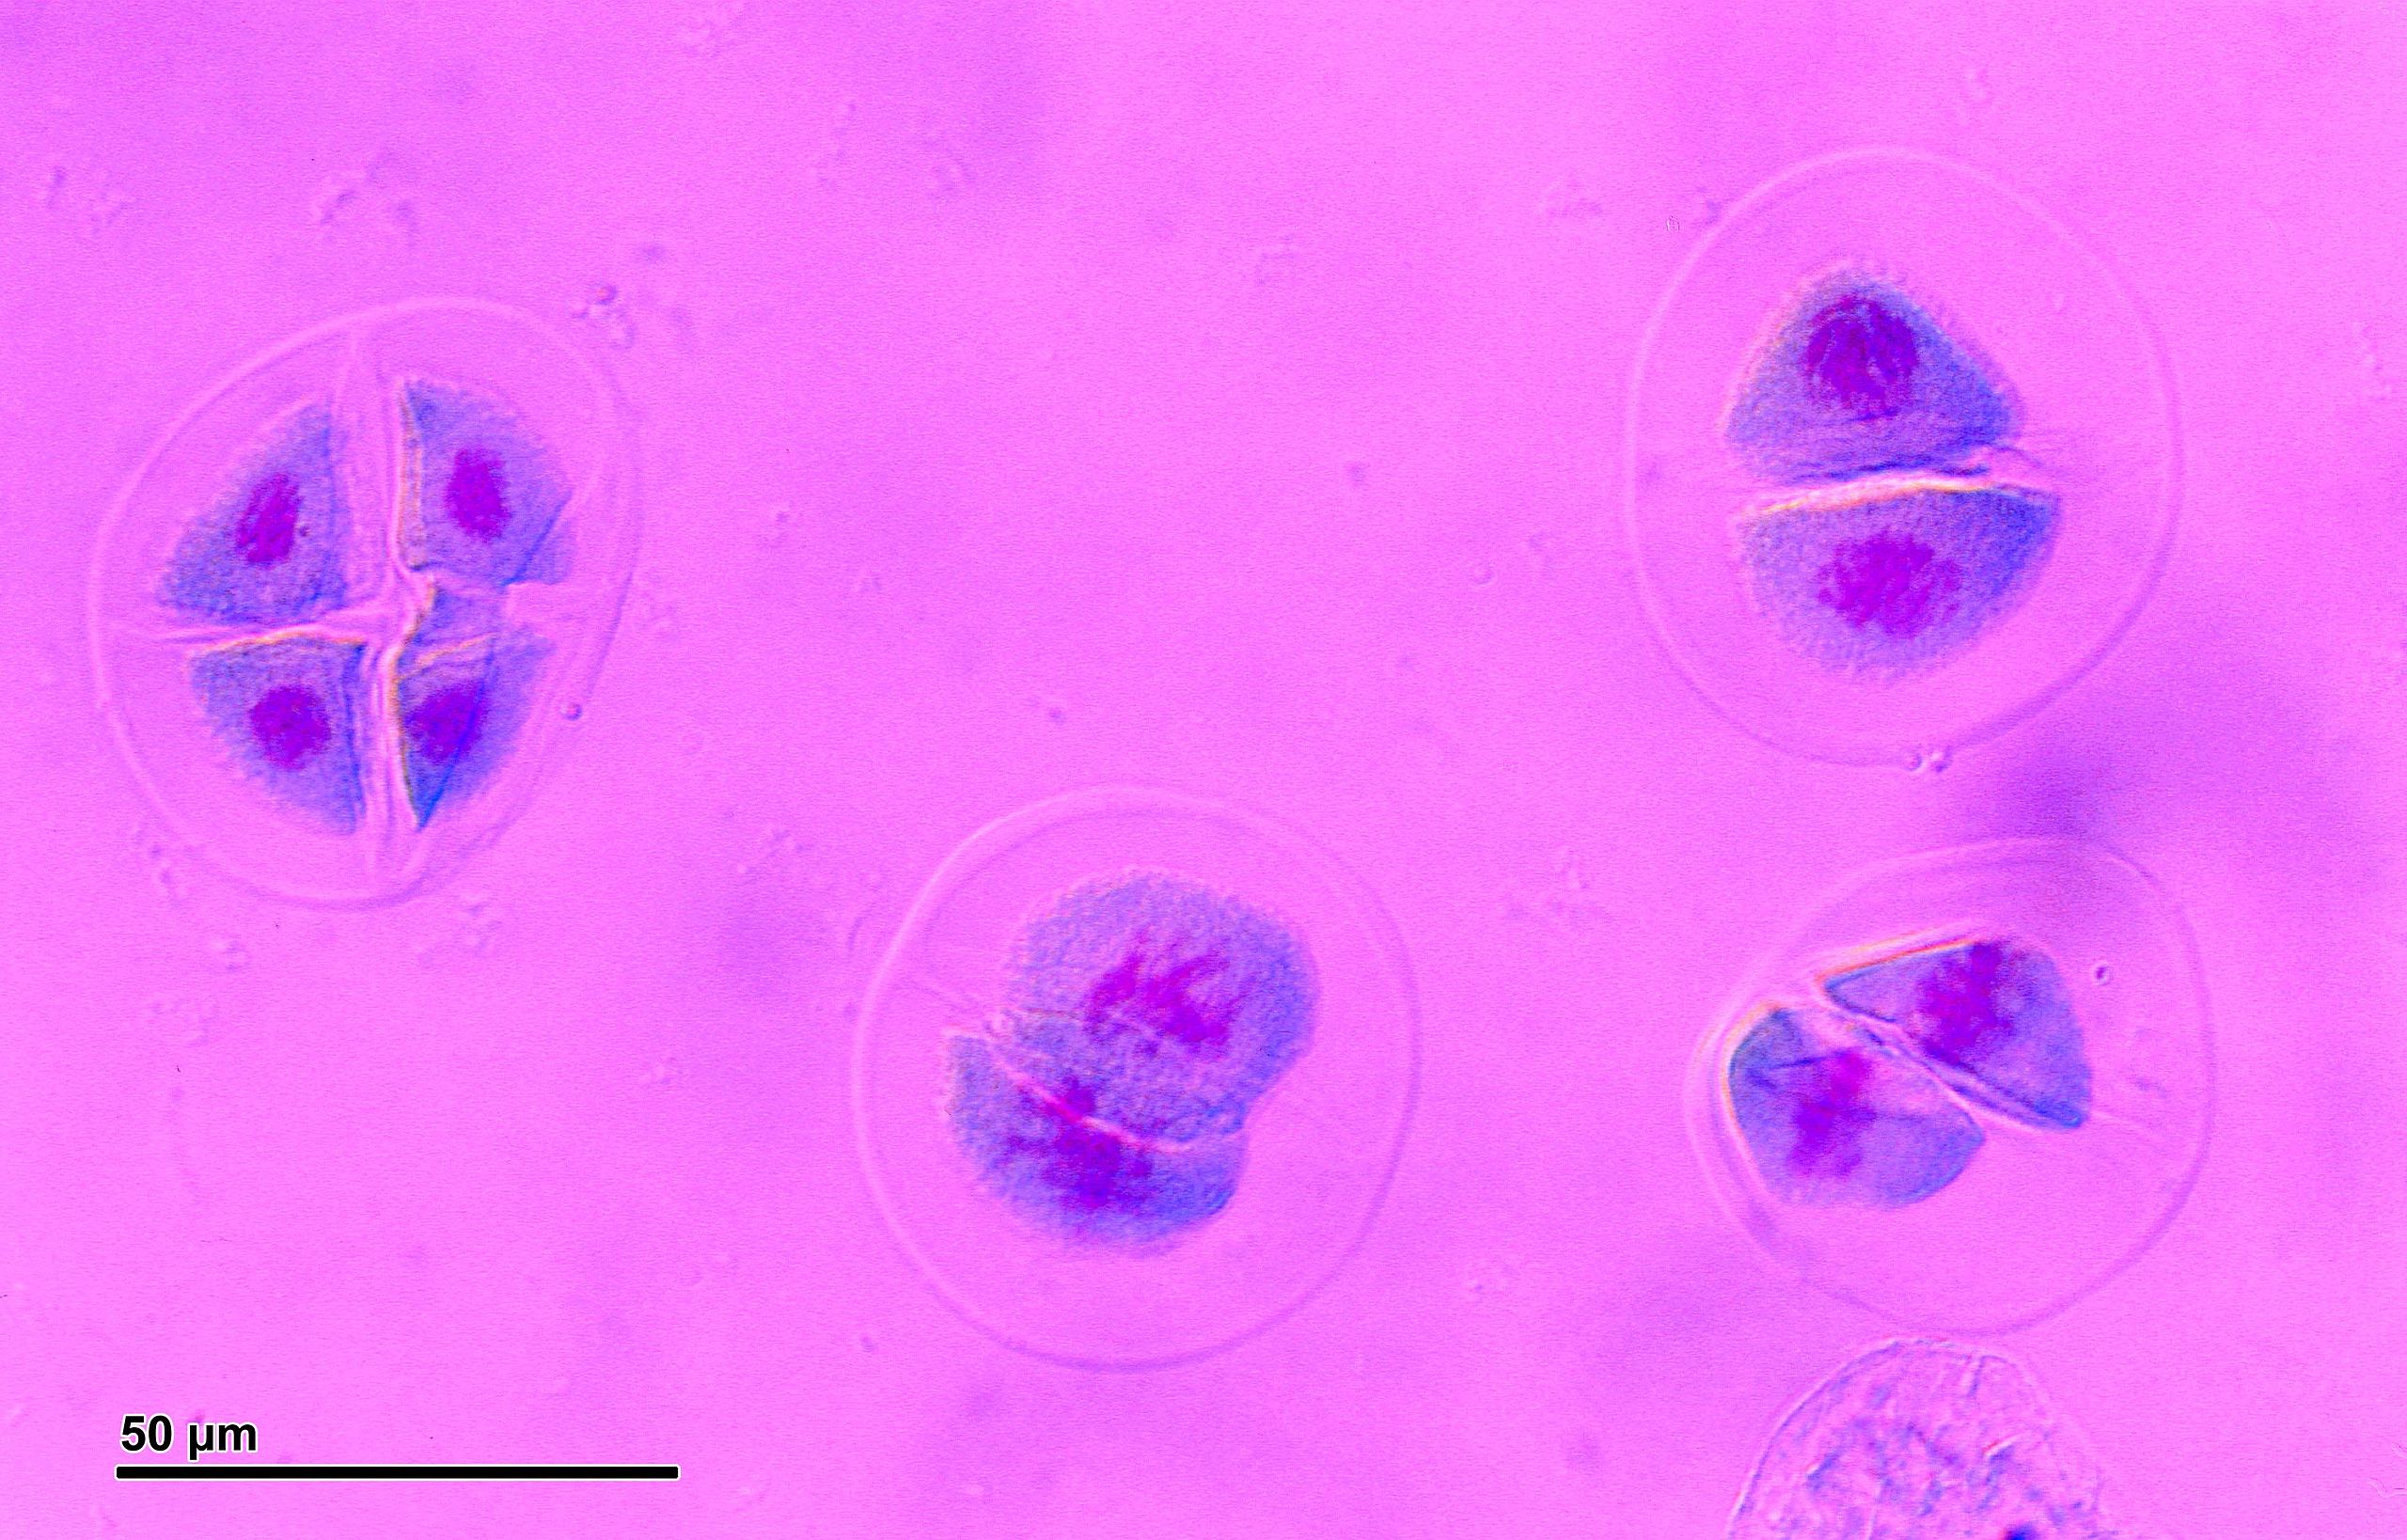 Four mother cells. The leftmost cell has four visible nuclei. The three cells on the right each have two visible nuclei.